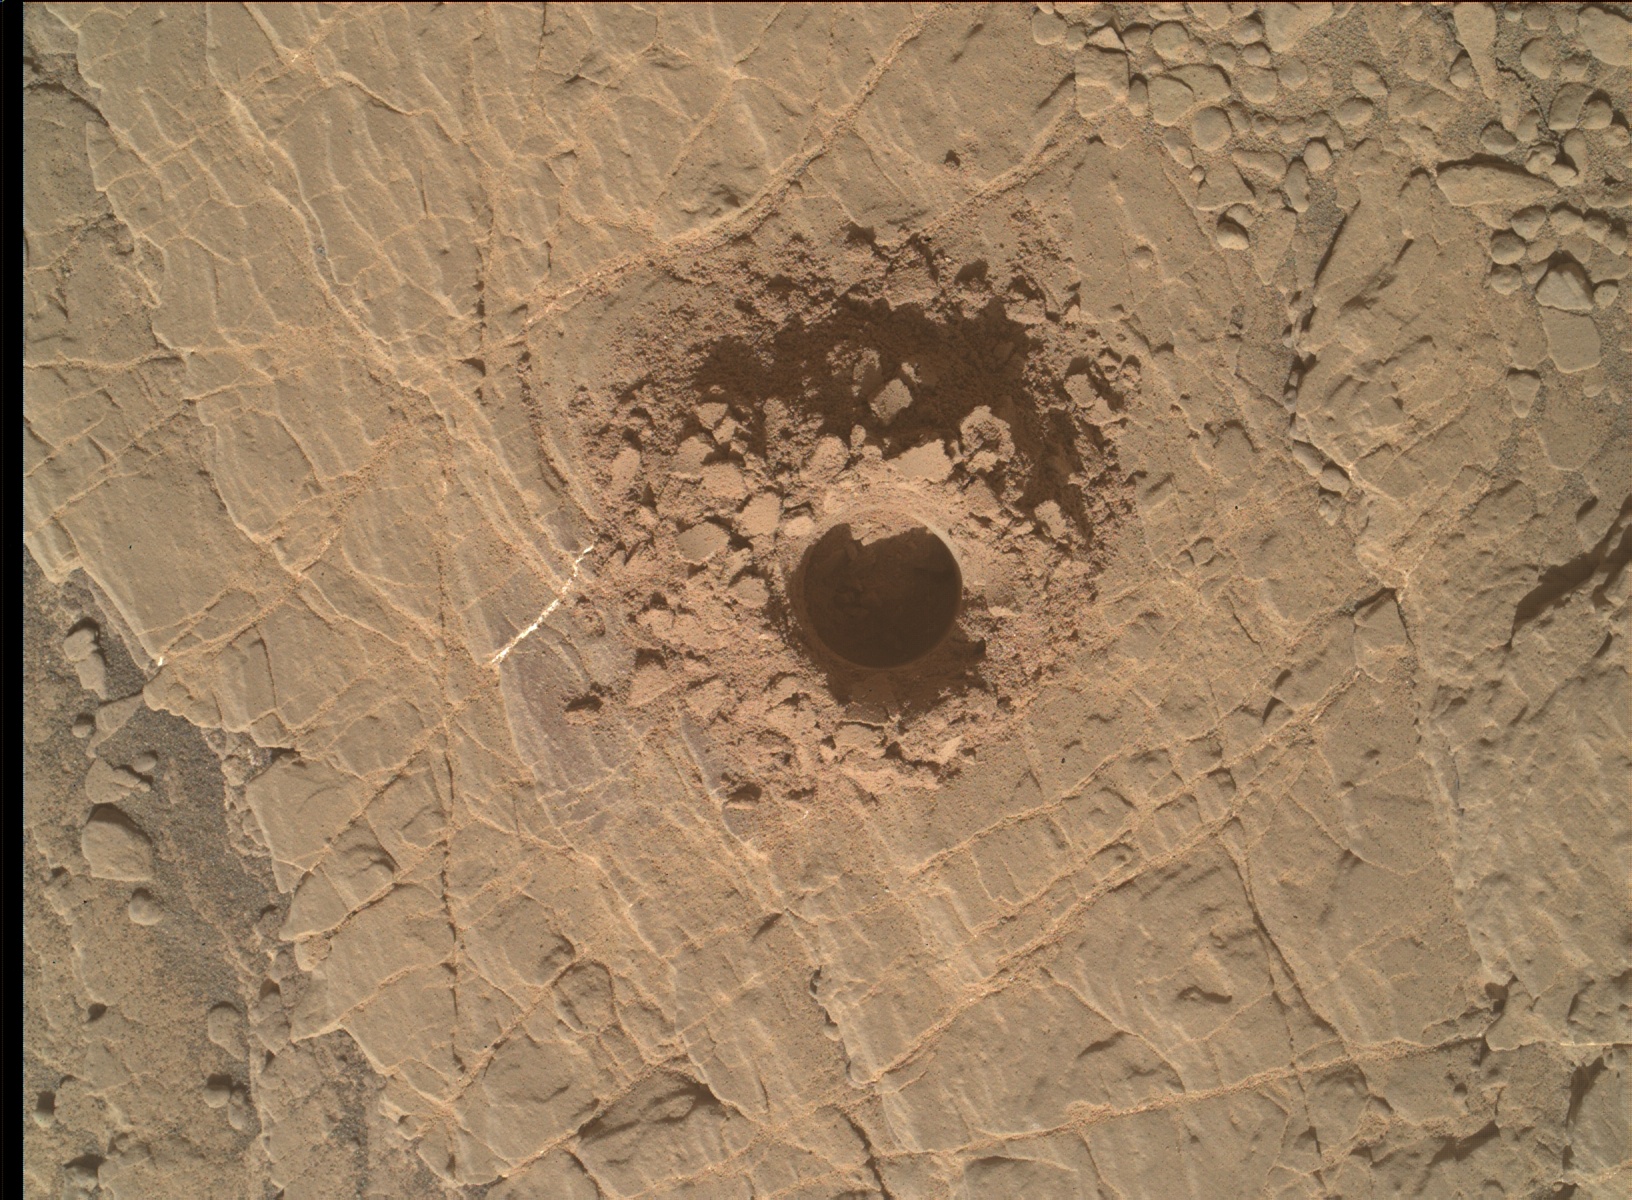 Sol 2524: The Tail(ings)-end of the Glen Etive 1 Drilling Campaign